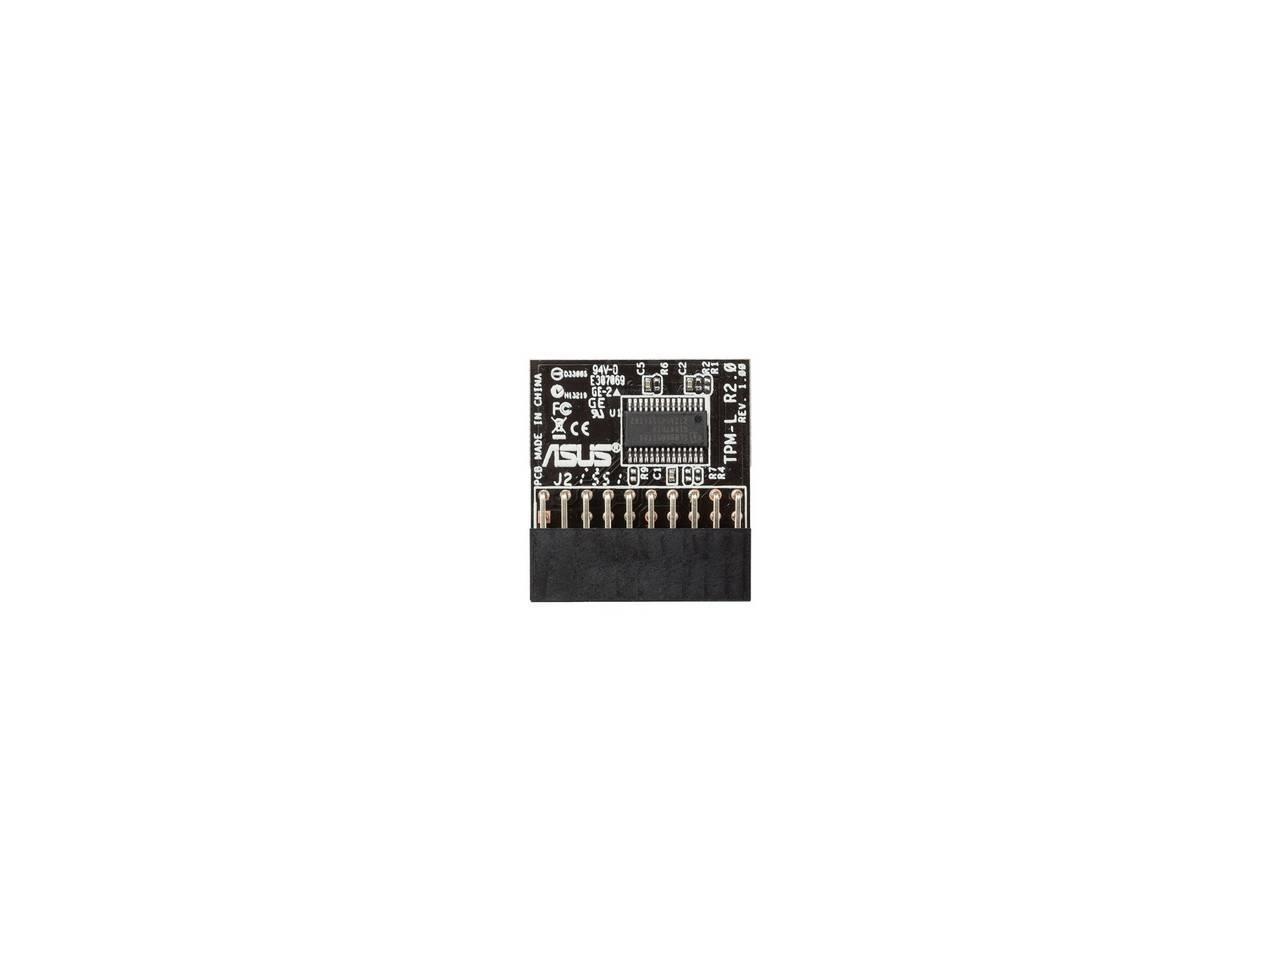 Asus Accessory TPM-L R2.0 TPM Module Connector For ASUS Motherboard Retail